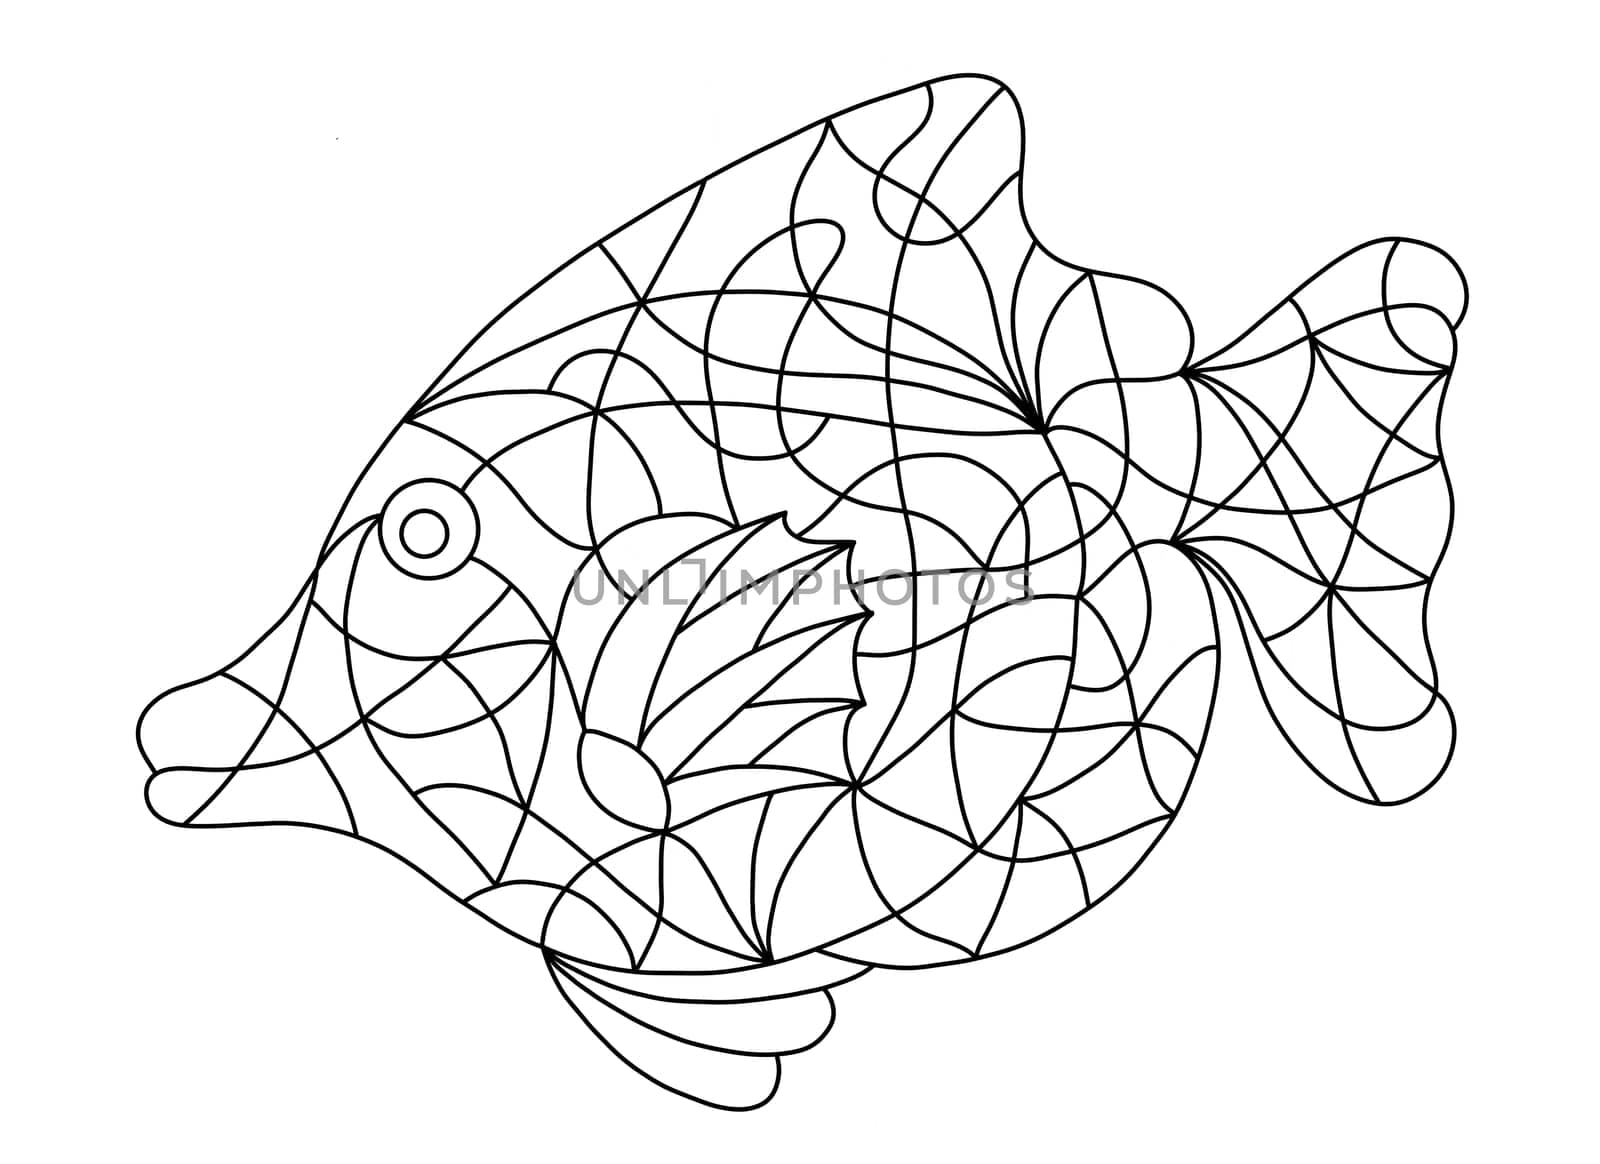 Black and White Fish in Stained Glass Style for Coloring Books Adult, Coloring Pages for Kids, Print, Batik and Mosaic Tile Window. Hand Drawn Contours and Outline Illustration with Aquarium Goldfish.